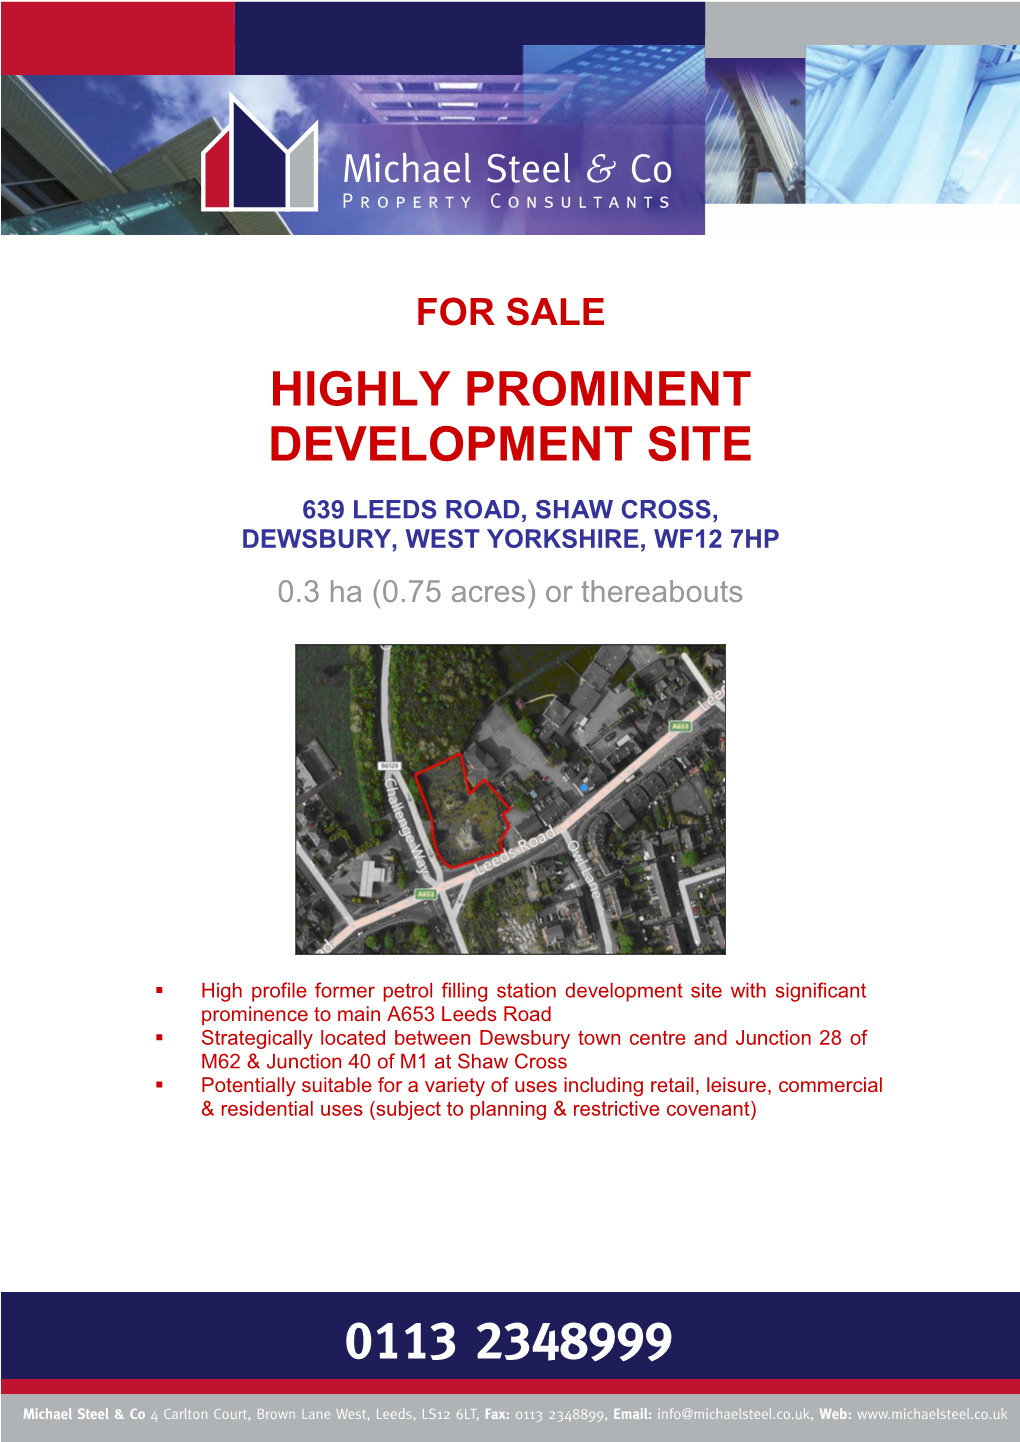 For Sale Highly Prominent Development Site 639 Leeds Road, Shaw Cross, Dewsbury, West Yorkshire, Wf12